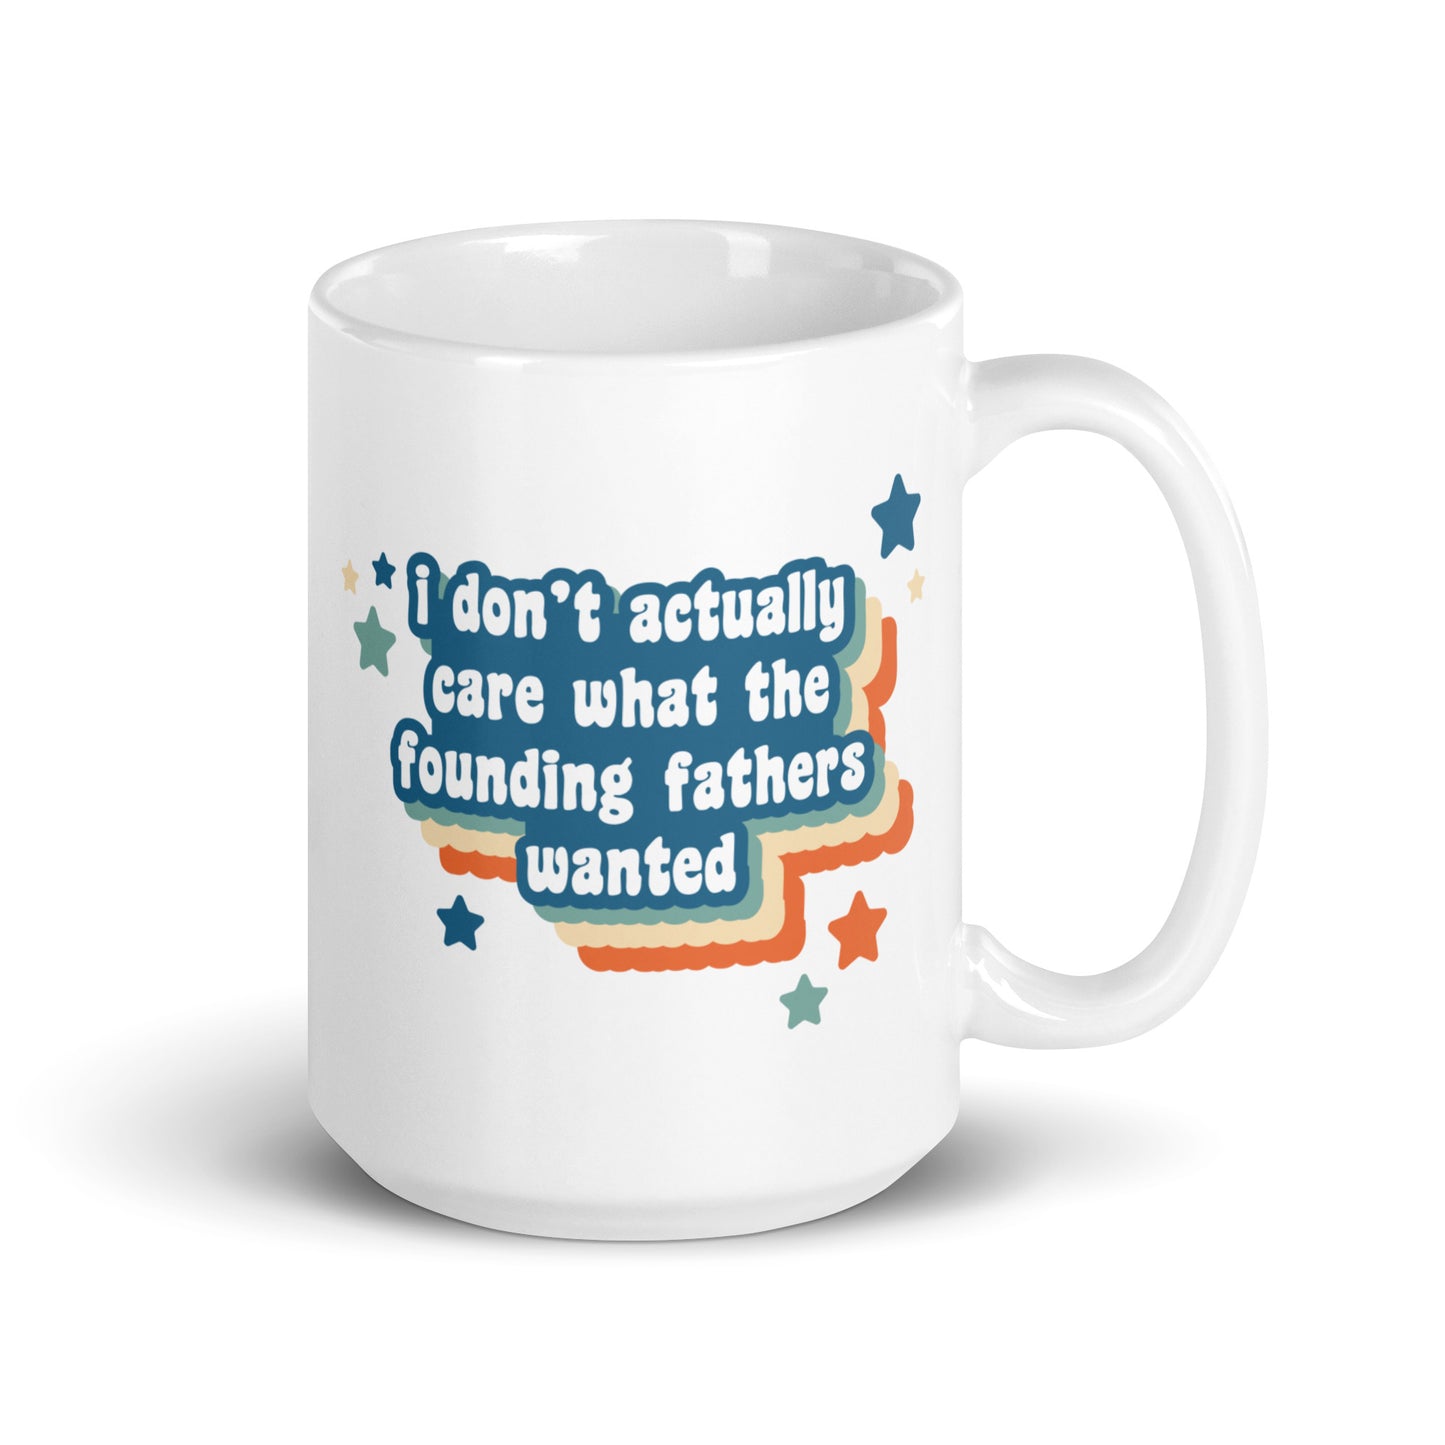 A white 15oz ceramic mug featuring text that reads "I don't actually care what the founding fathers wanted". Stars and a colorful drop shadow surround the text.